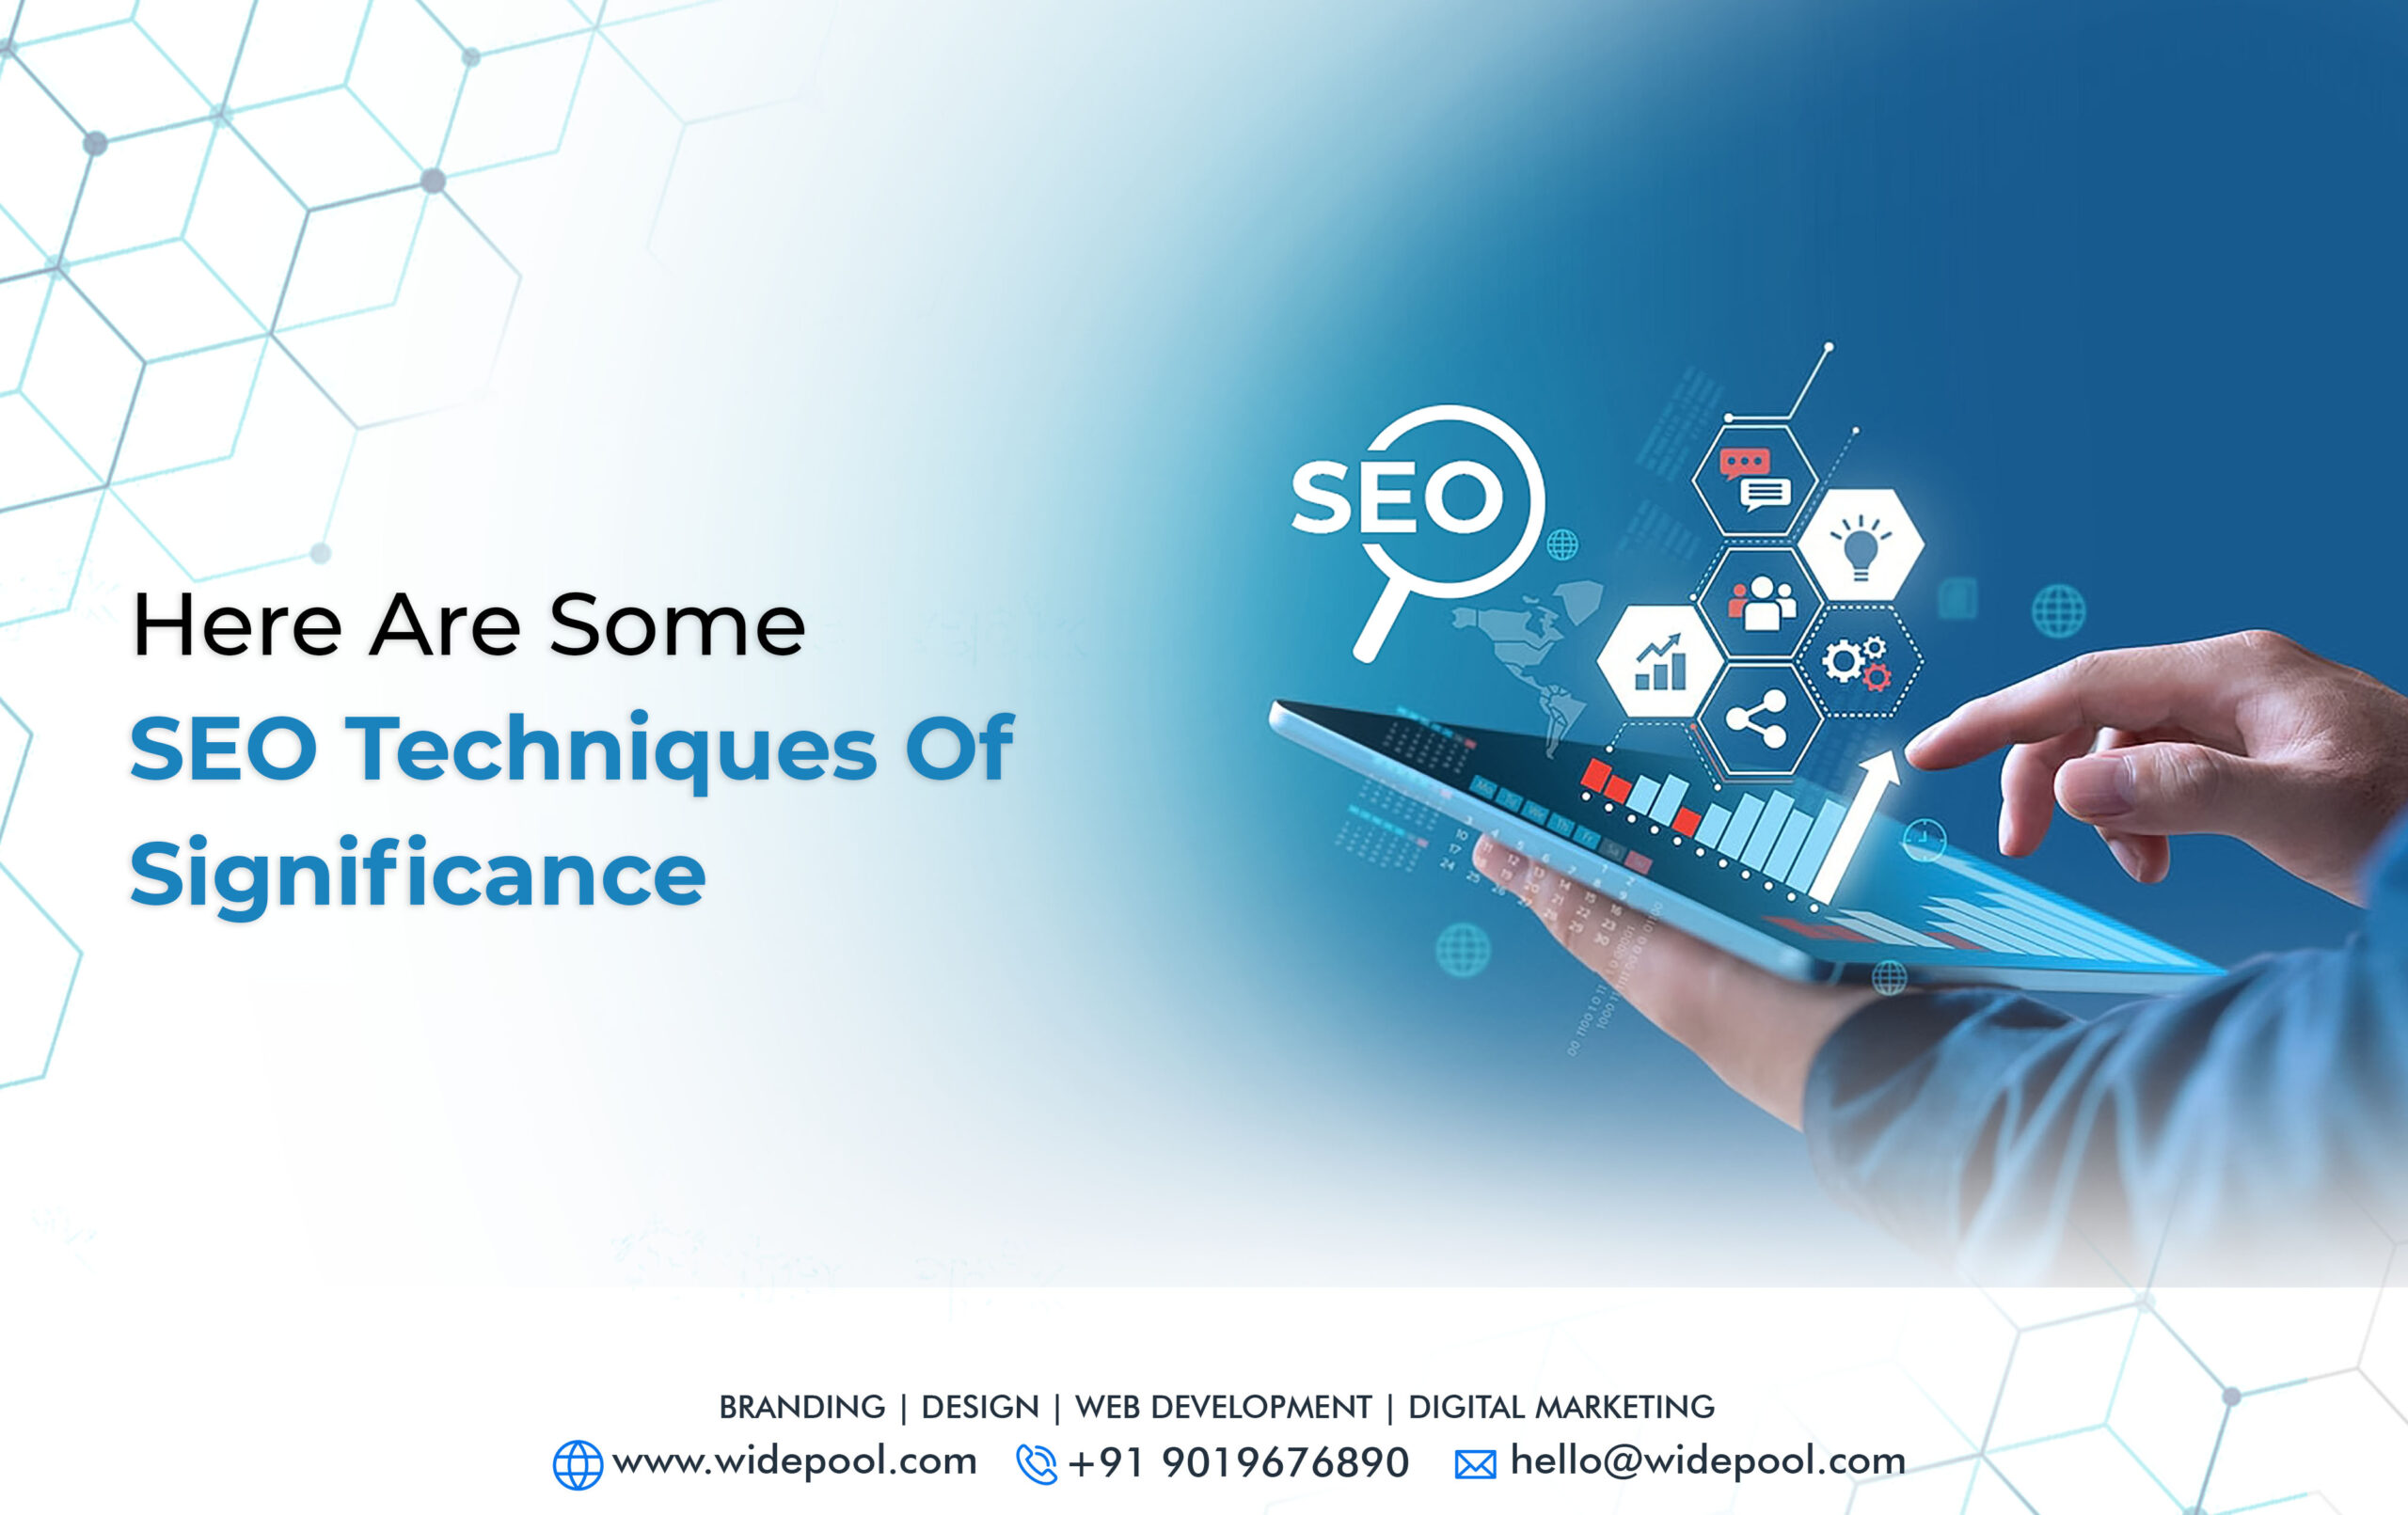 Here Are Some SEO Techniques of Significance